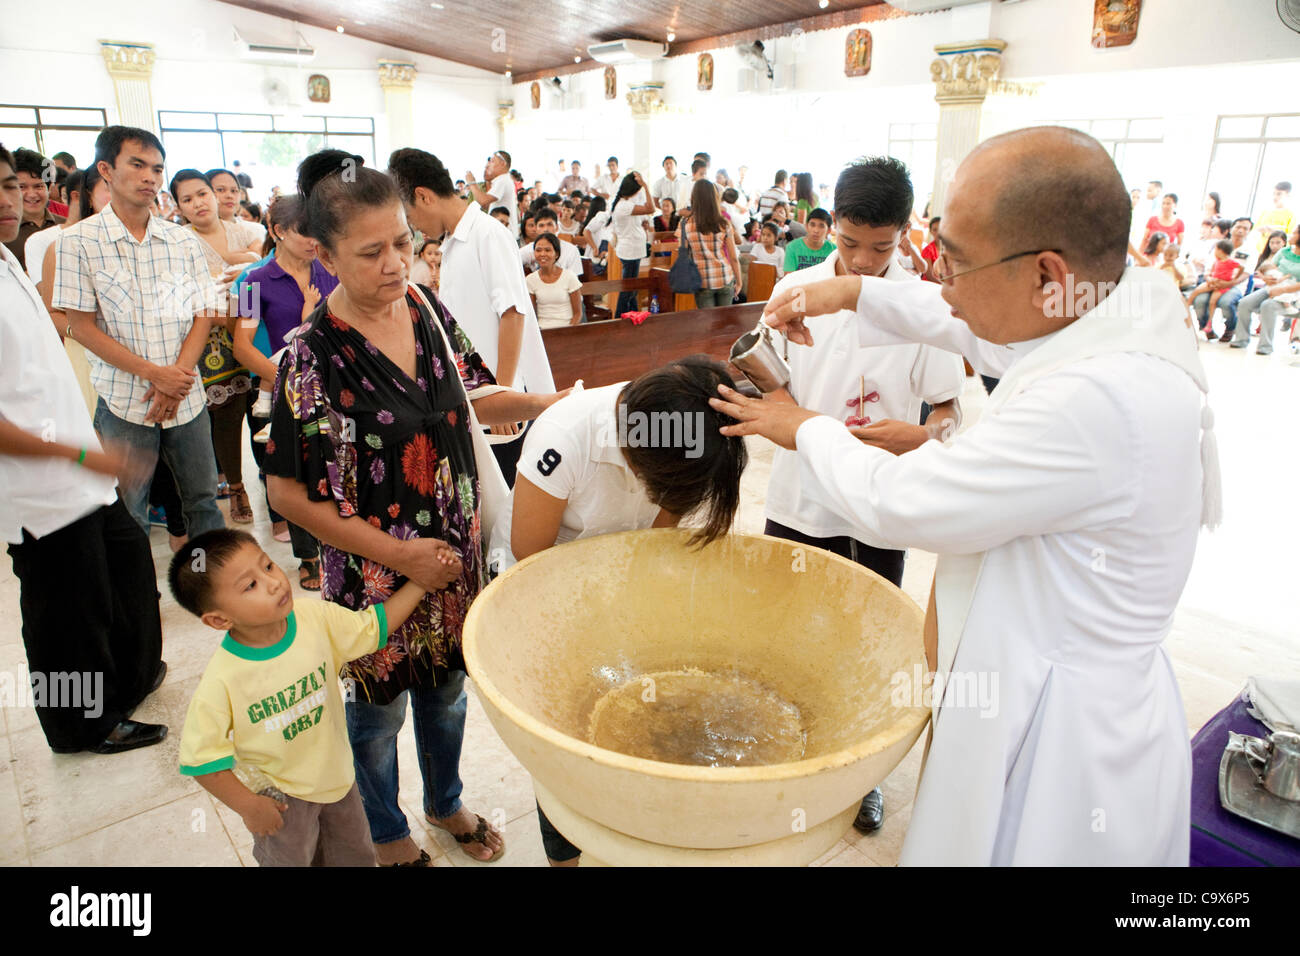 Lapu-Lapu City, Philippines, 26/02/2012:  200-300 babies and a few adults being baptised in a single 3 hour ceremony at Mactan Air Base Chapel. Stock Photo